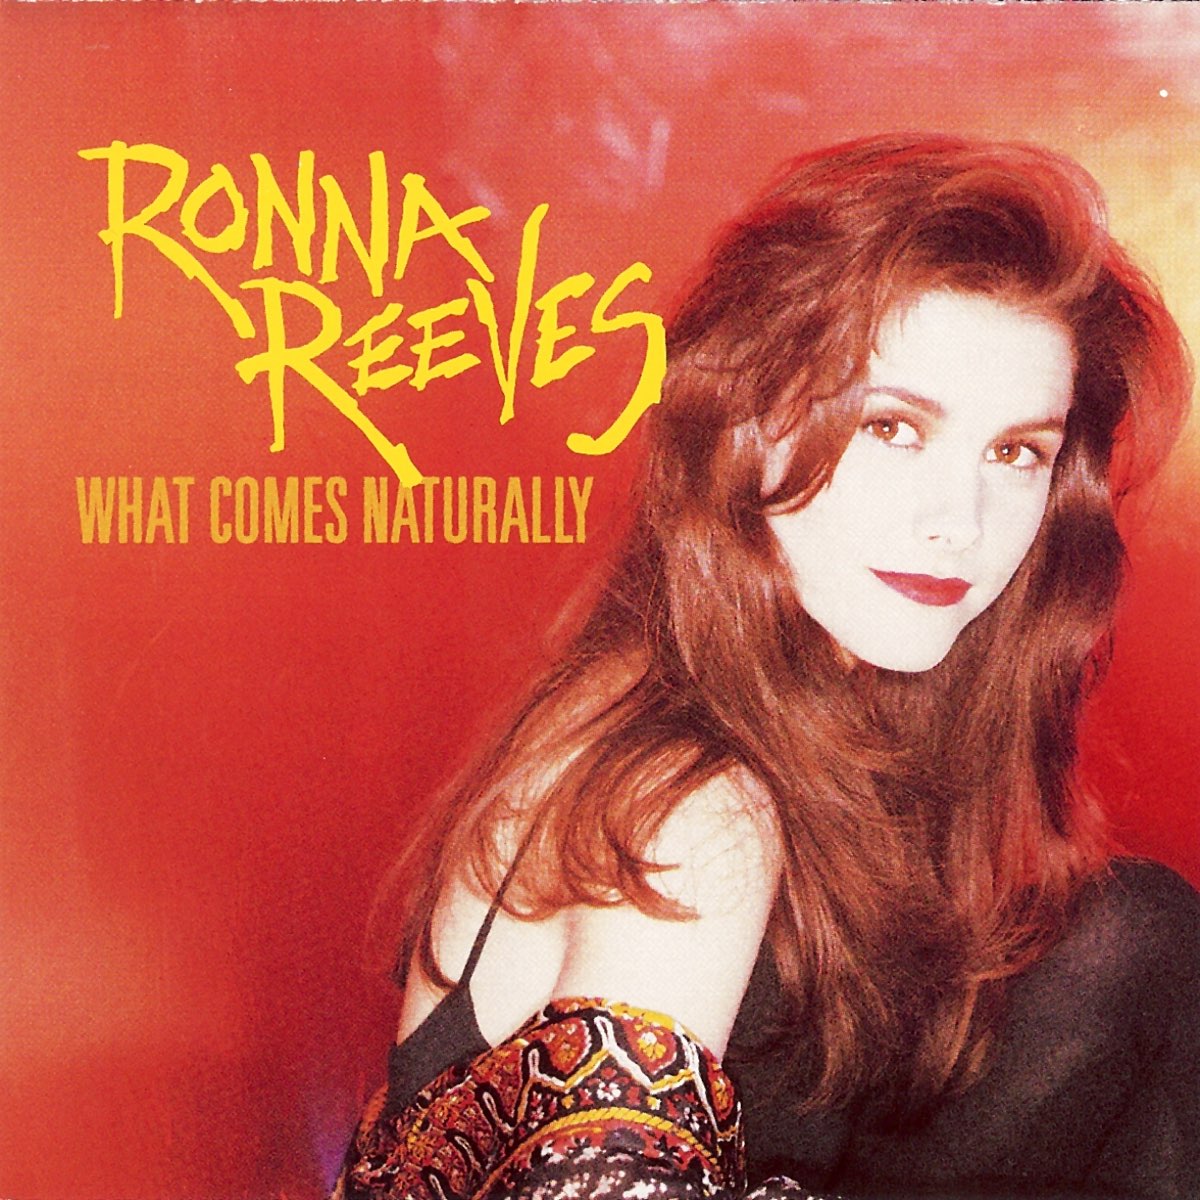 Comes natural. Ronna Reeves. Irene Flaming. Ronnas.